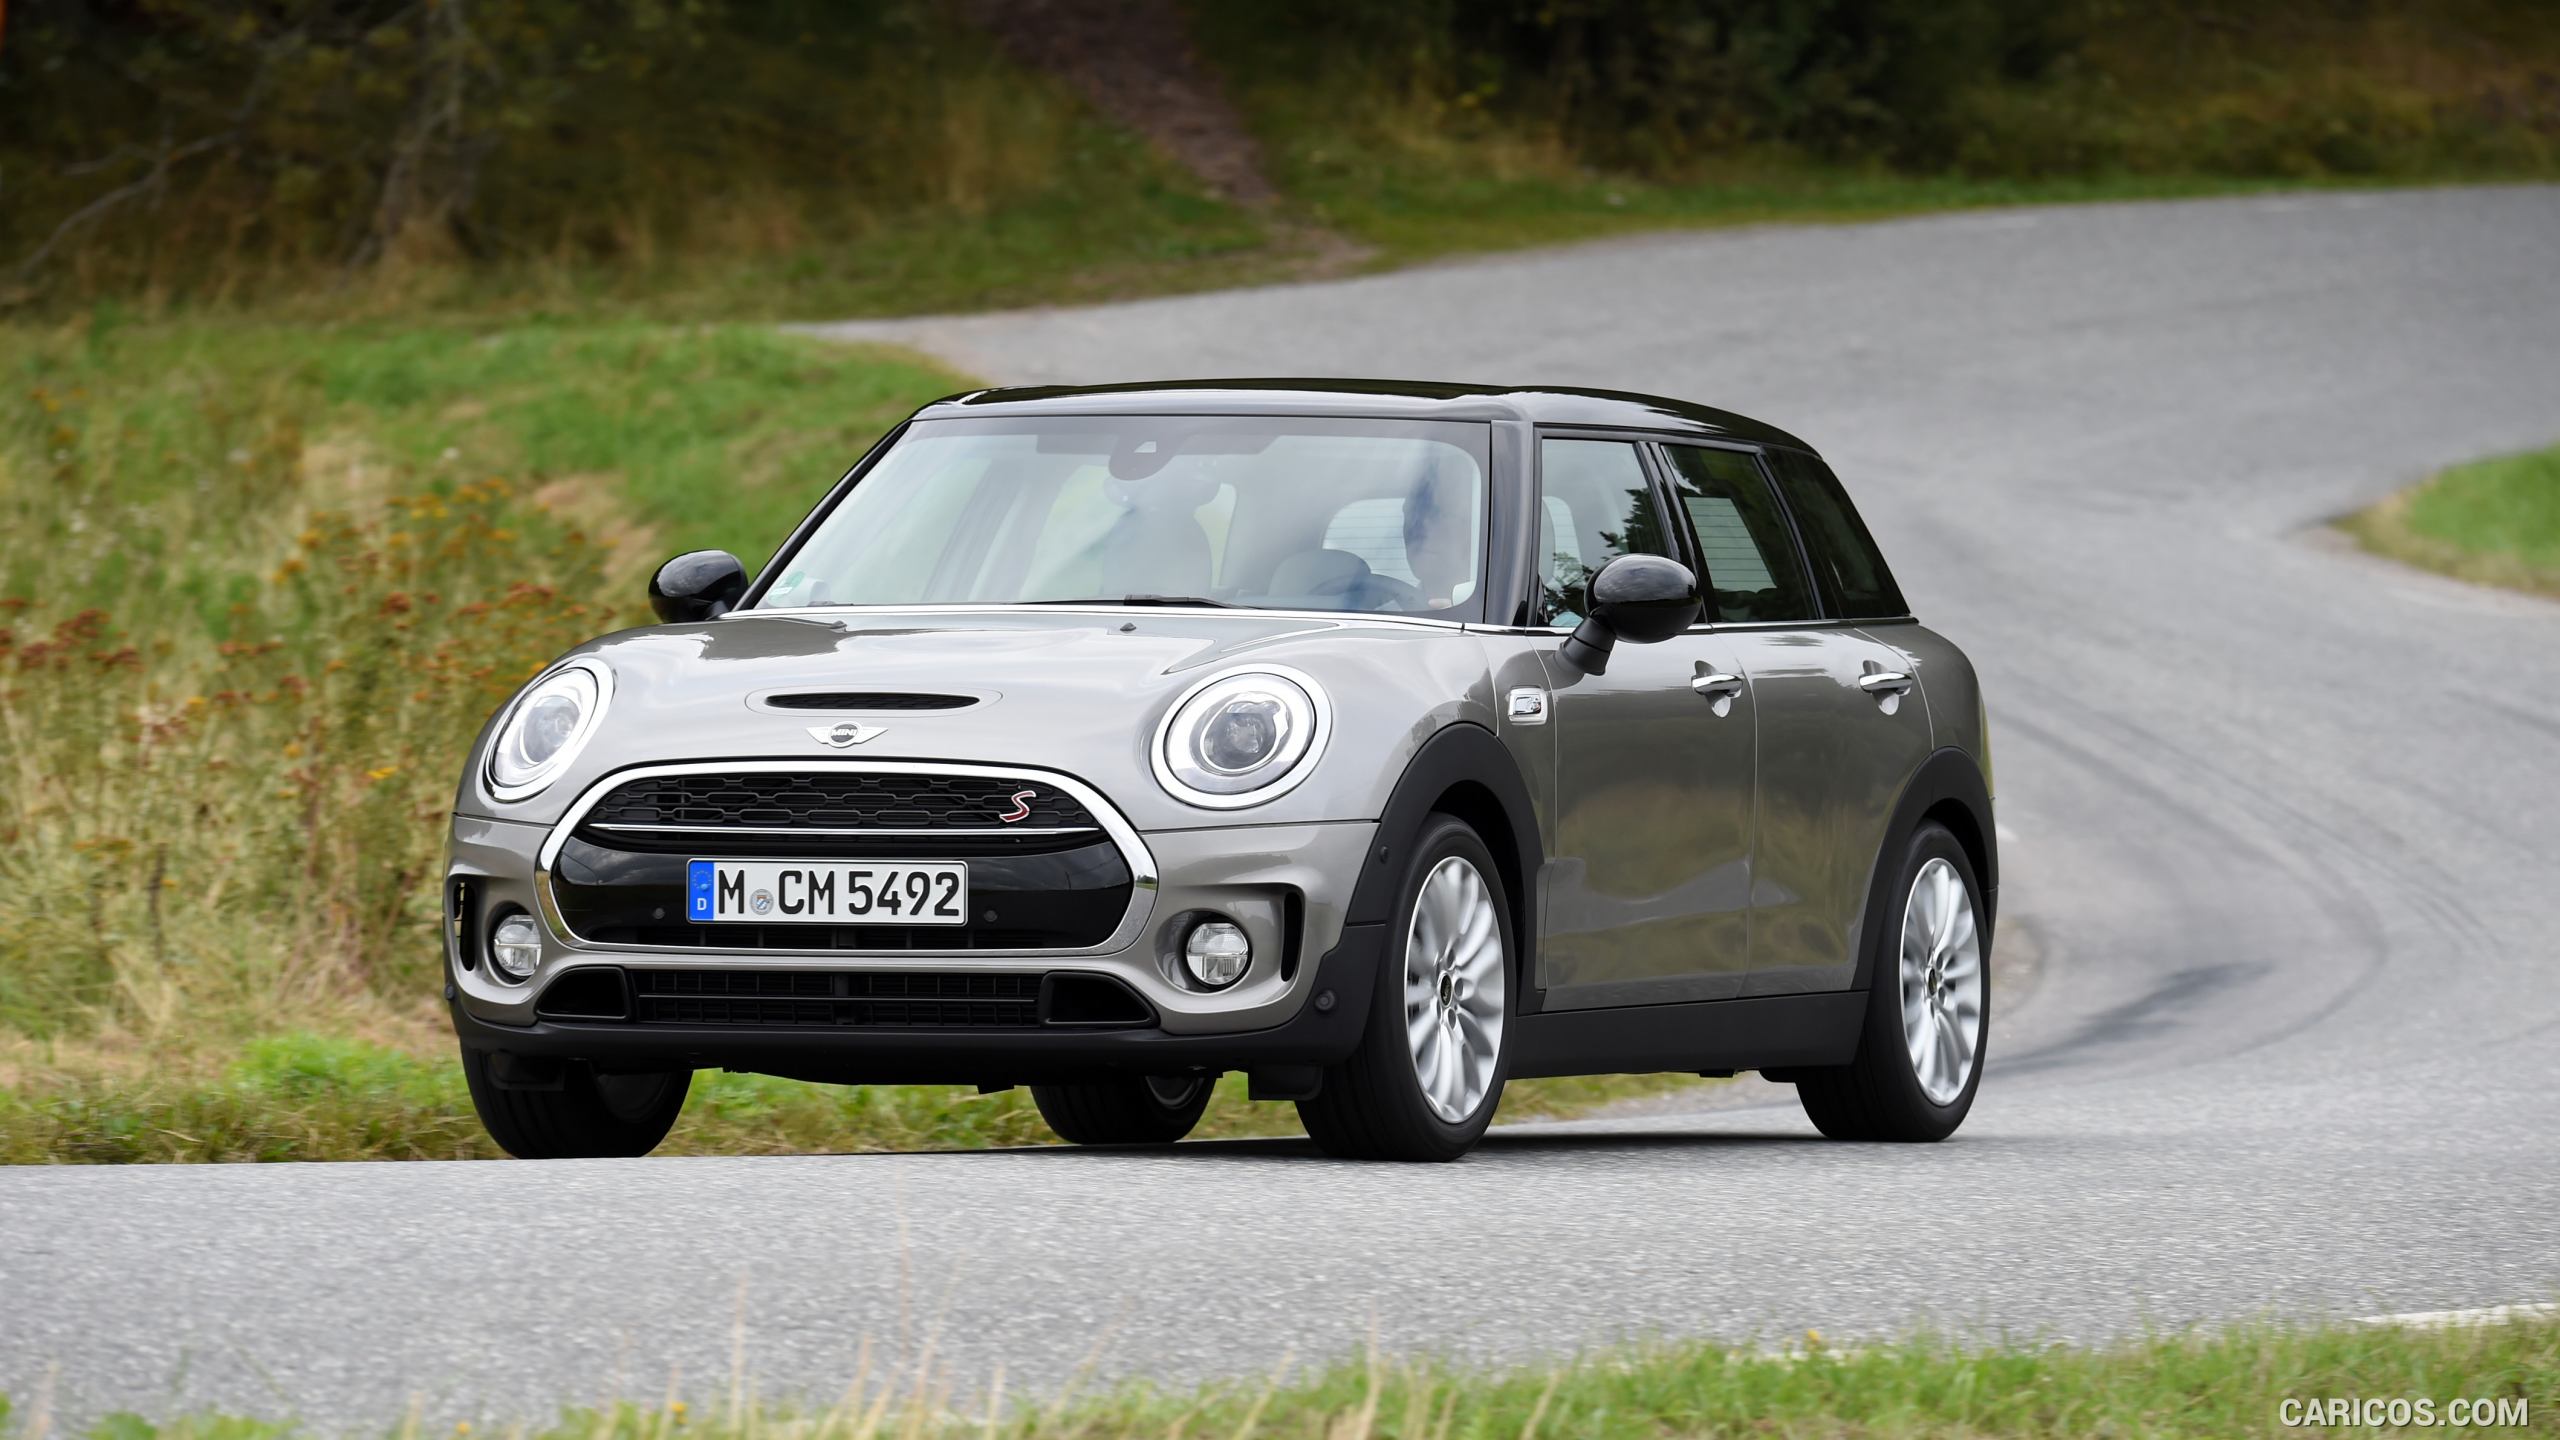 2016 MINI Cooper S Clubman in Metallic Melting Silver - Front, #160 of 380